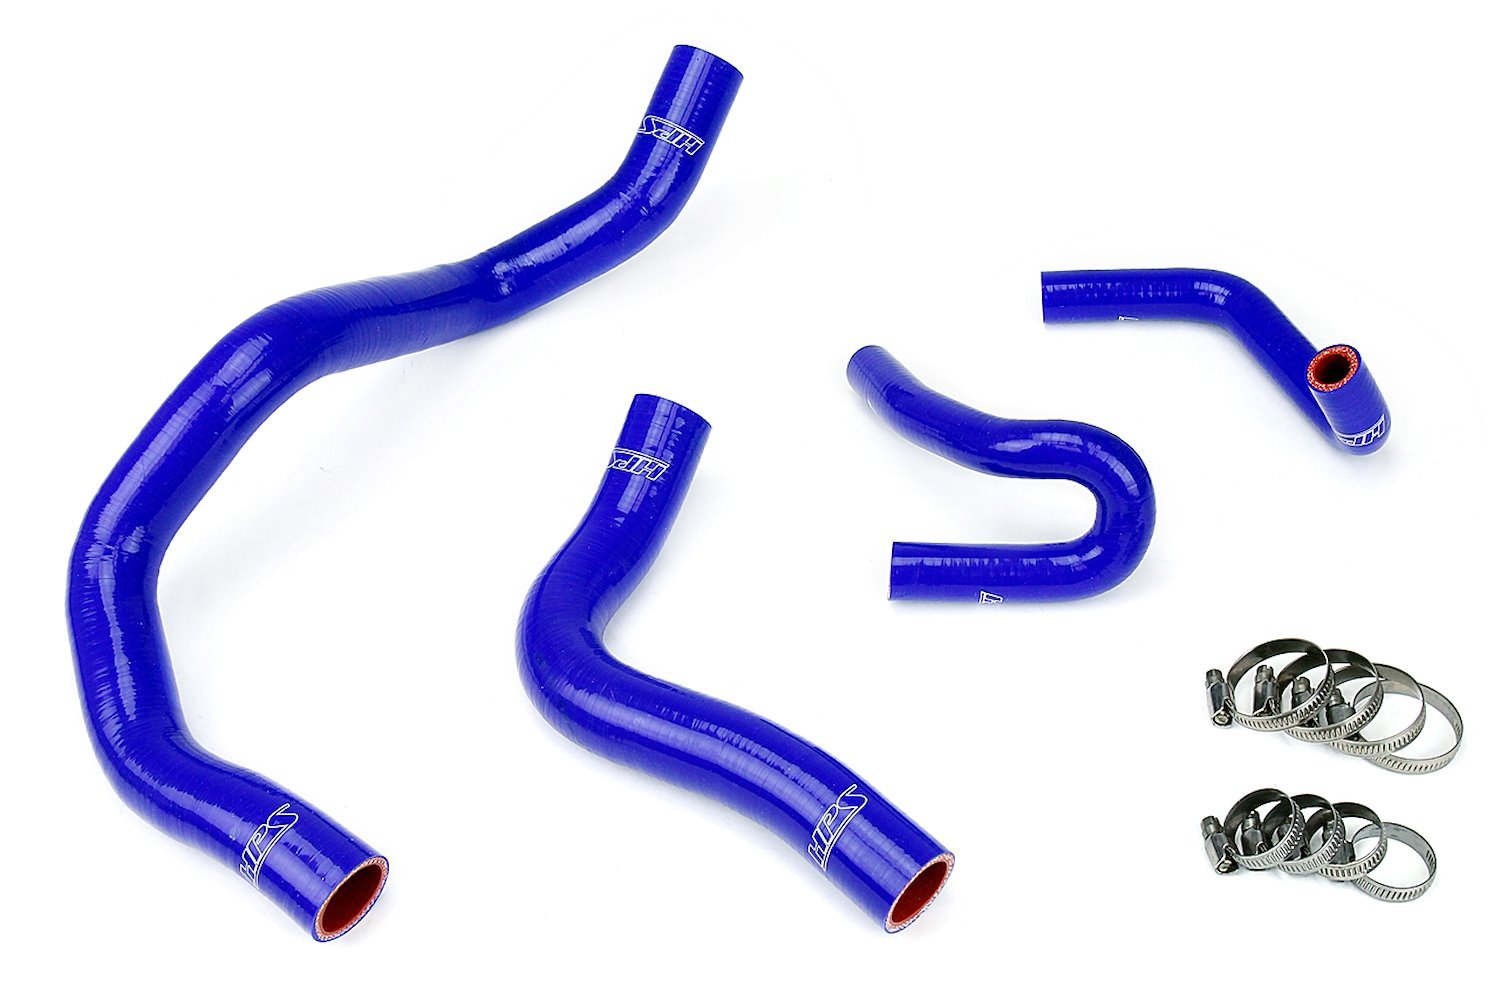 57-1413-BLUE Coolant Hose Kit, High-Temp 3-Ply Reinforced Silicone, Replace Rubber Radiator Heater Coolant Hoses